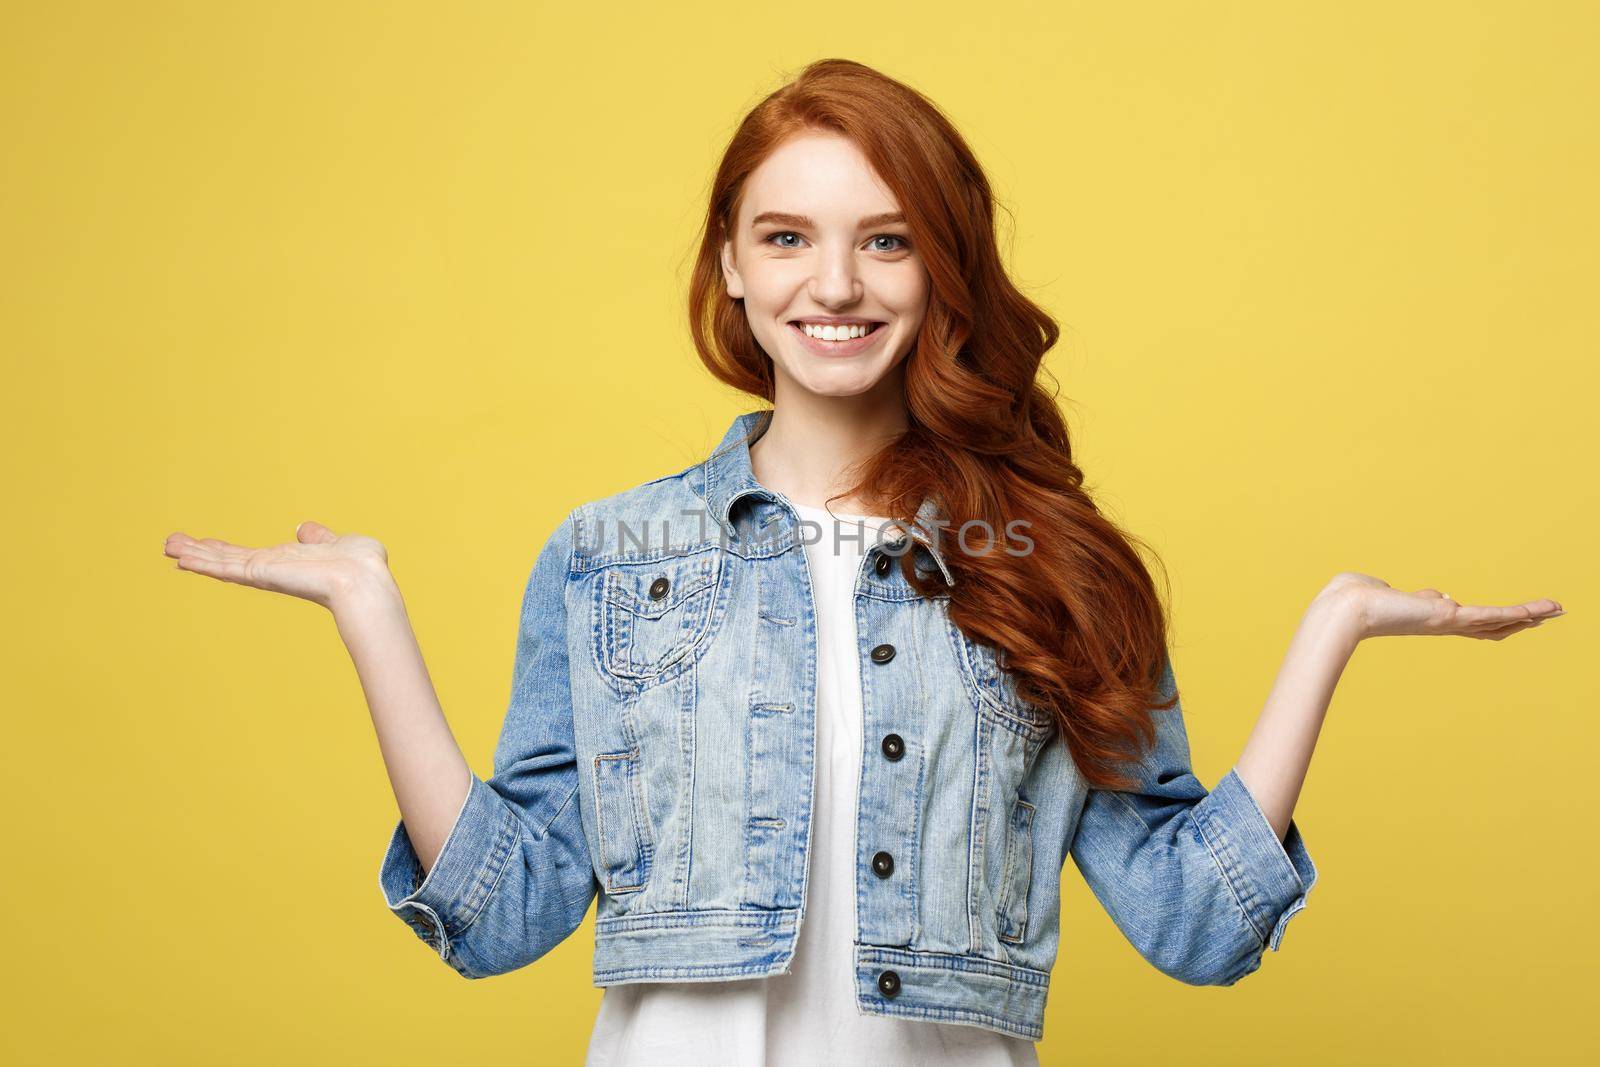 Lifestyle Concept: Surprised young woman with hand on side over golden yellow background. Looking at camera